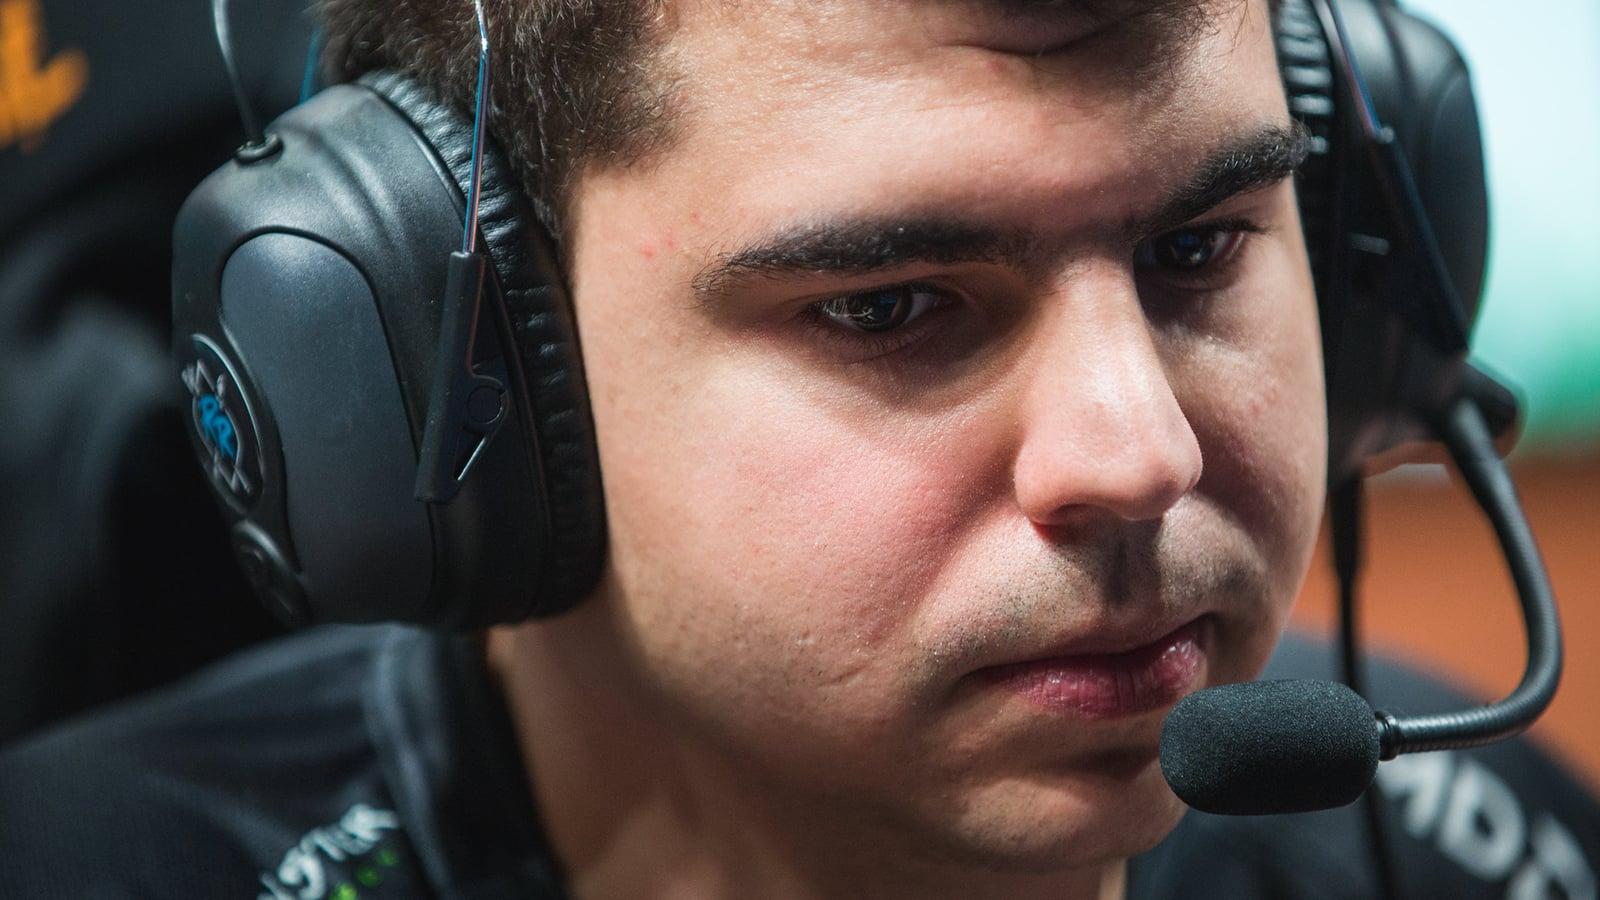 Bwipo confirms he's leaving Fnatic at end of LEC Summer Split.